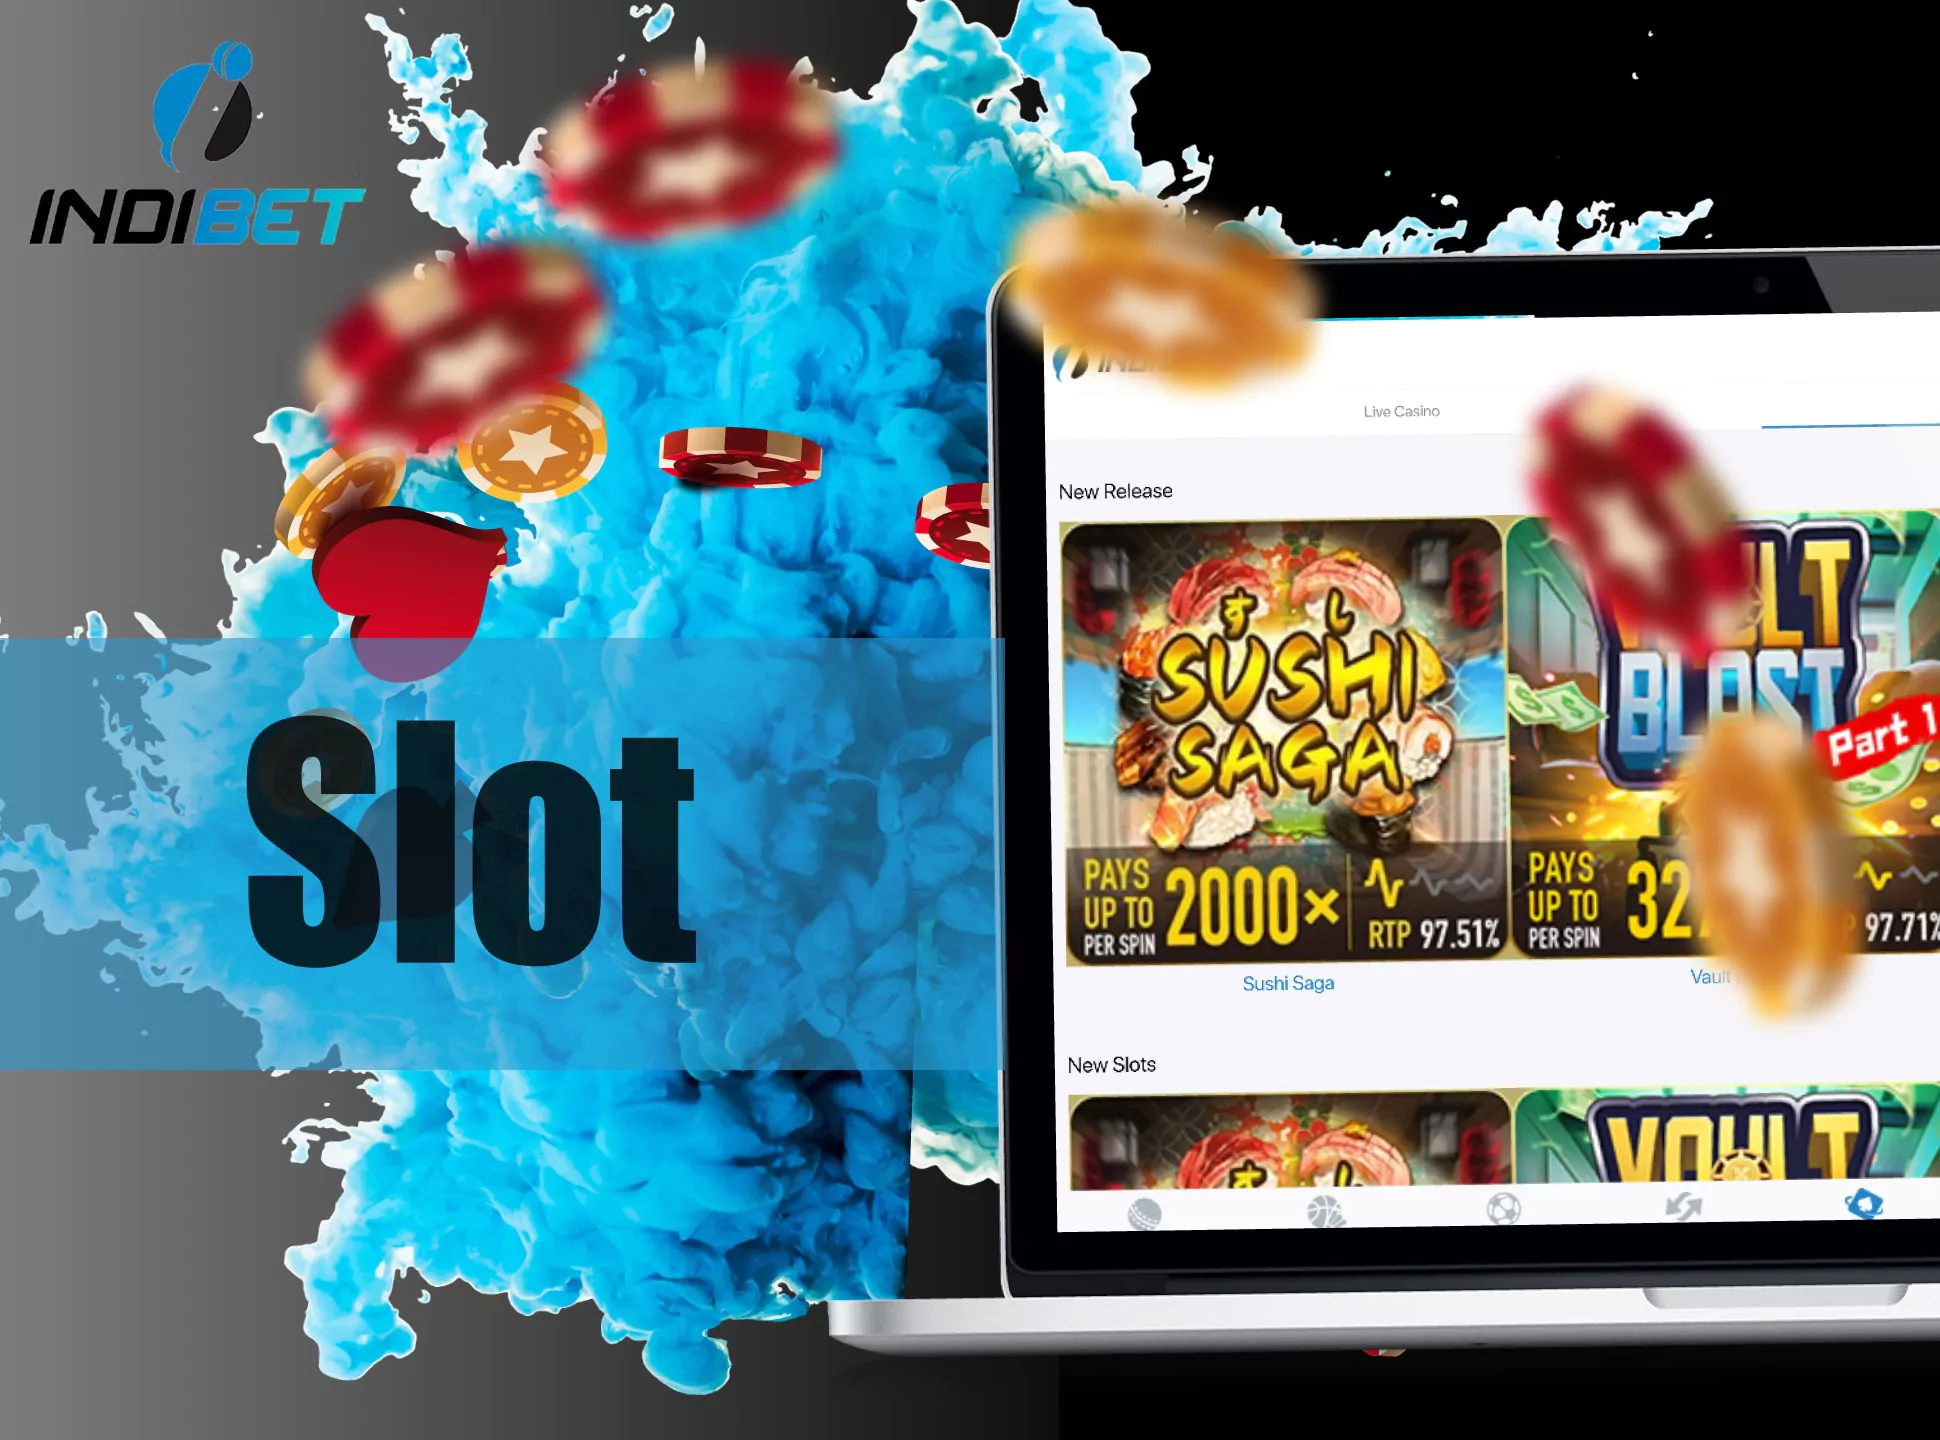 Spin different slots and win money at Indibet Casino.